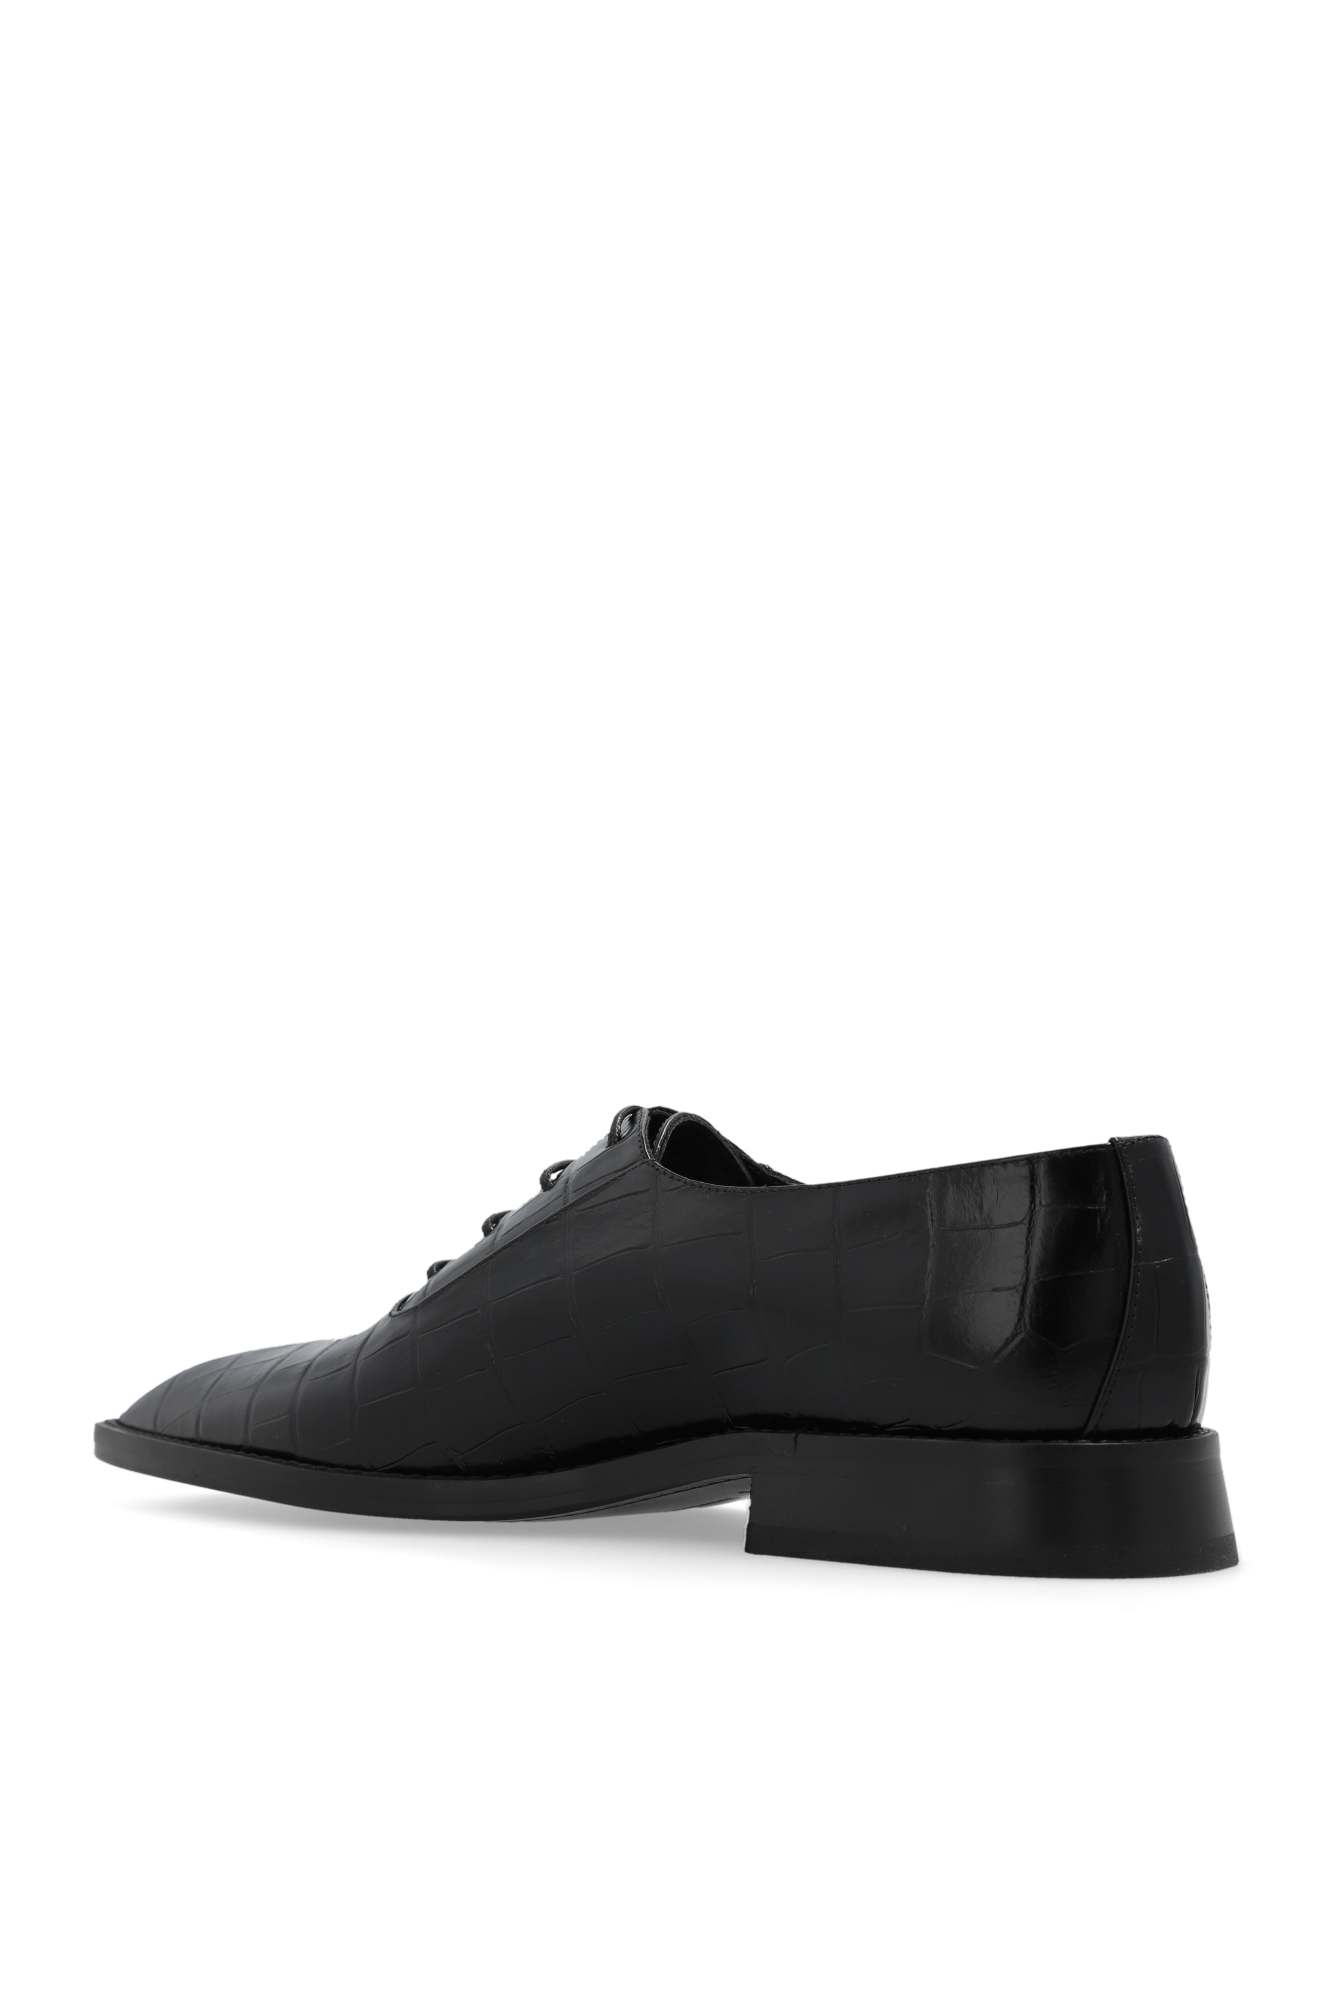 Victoria Beckham Leather Derby shoes